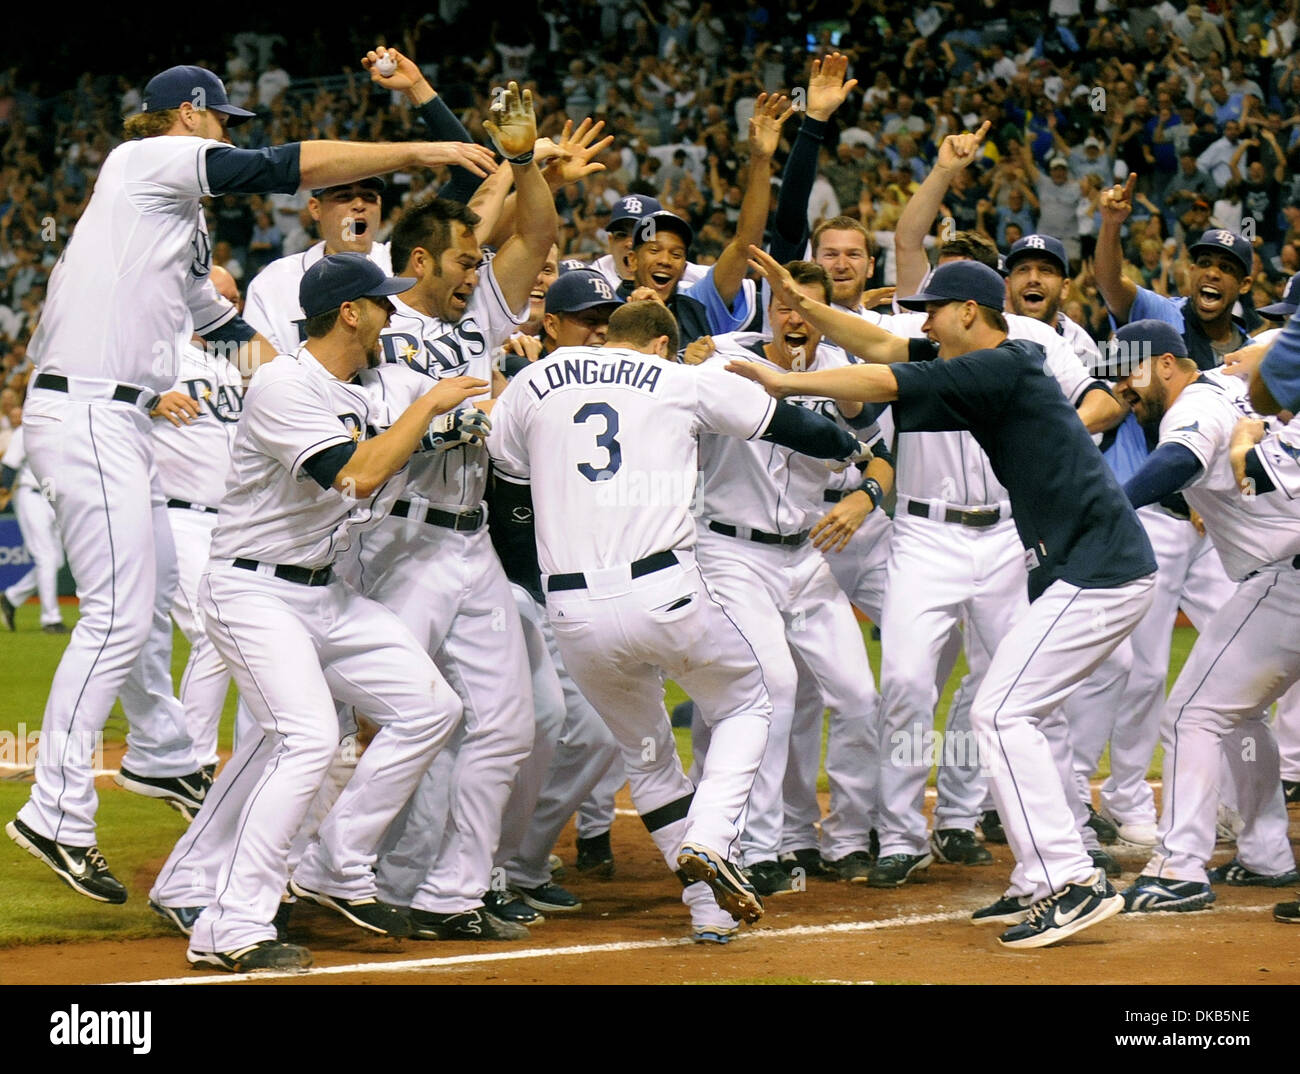 Sep. 29, 2011 - St. Petersburg, Florida, USA.The Tampa Bay Rays swarm Evan Longoria (3) following his 12th inning home run to beat the New York Yankees 8-7 and secure the American League wild card at a Major League Baseball game in St. Petersburg, Florida, USA  29 September 2011. (Credit Image: Brian Blanco/ZUMA Press) Stock Photo